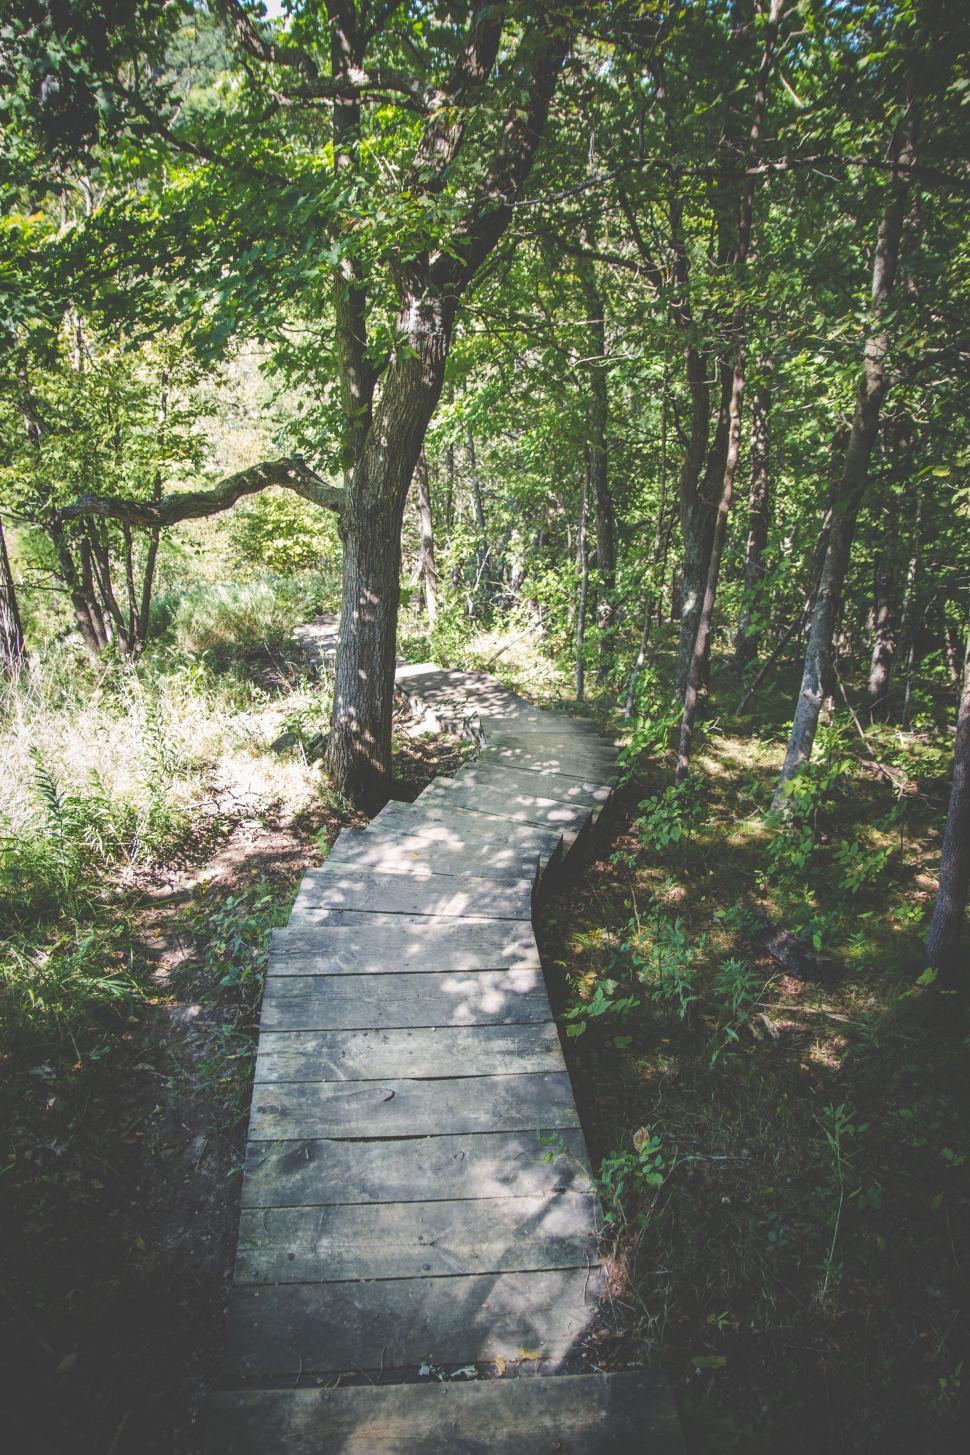 Free Image of Wooden Walkway in a Forest 